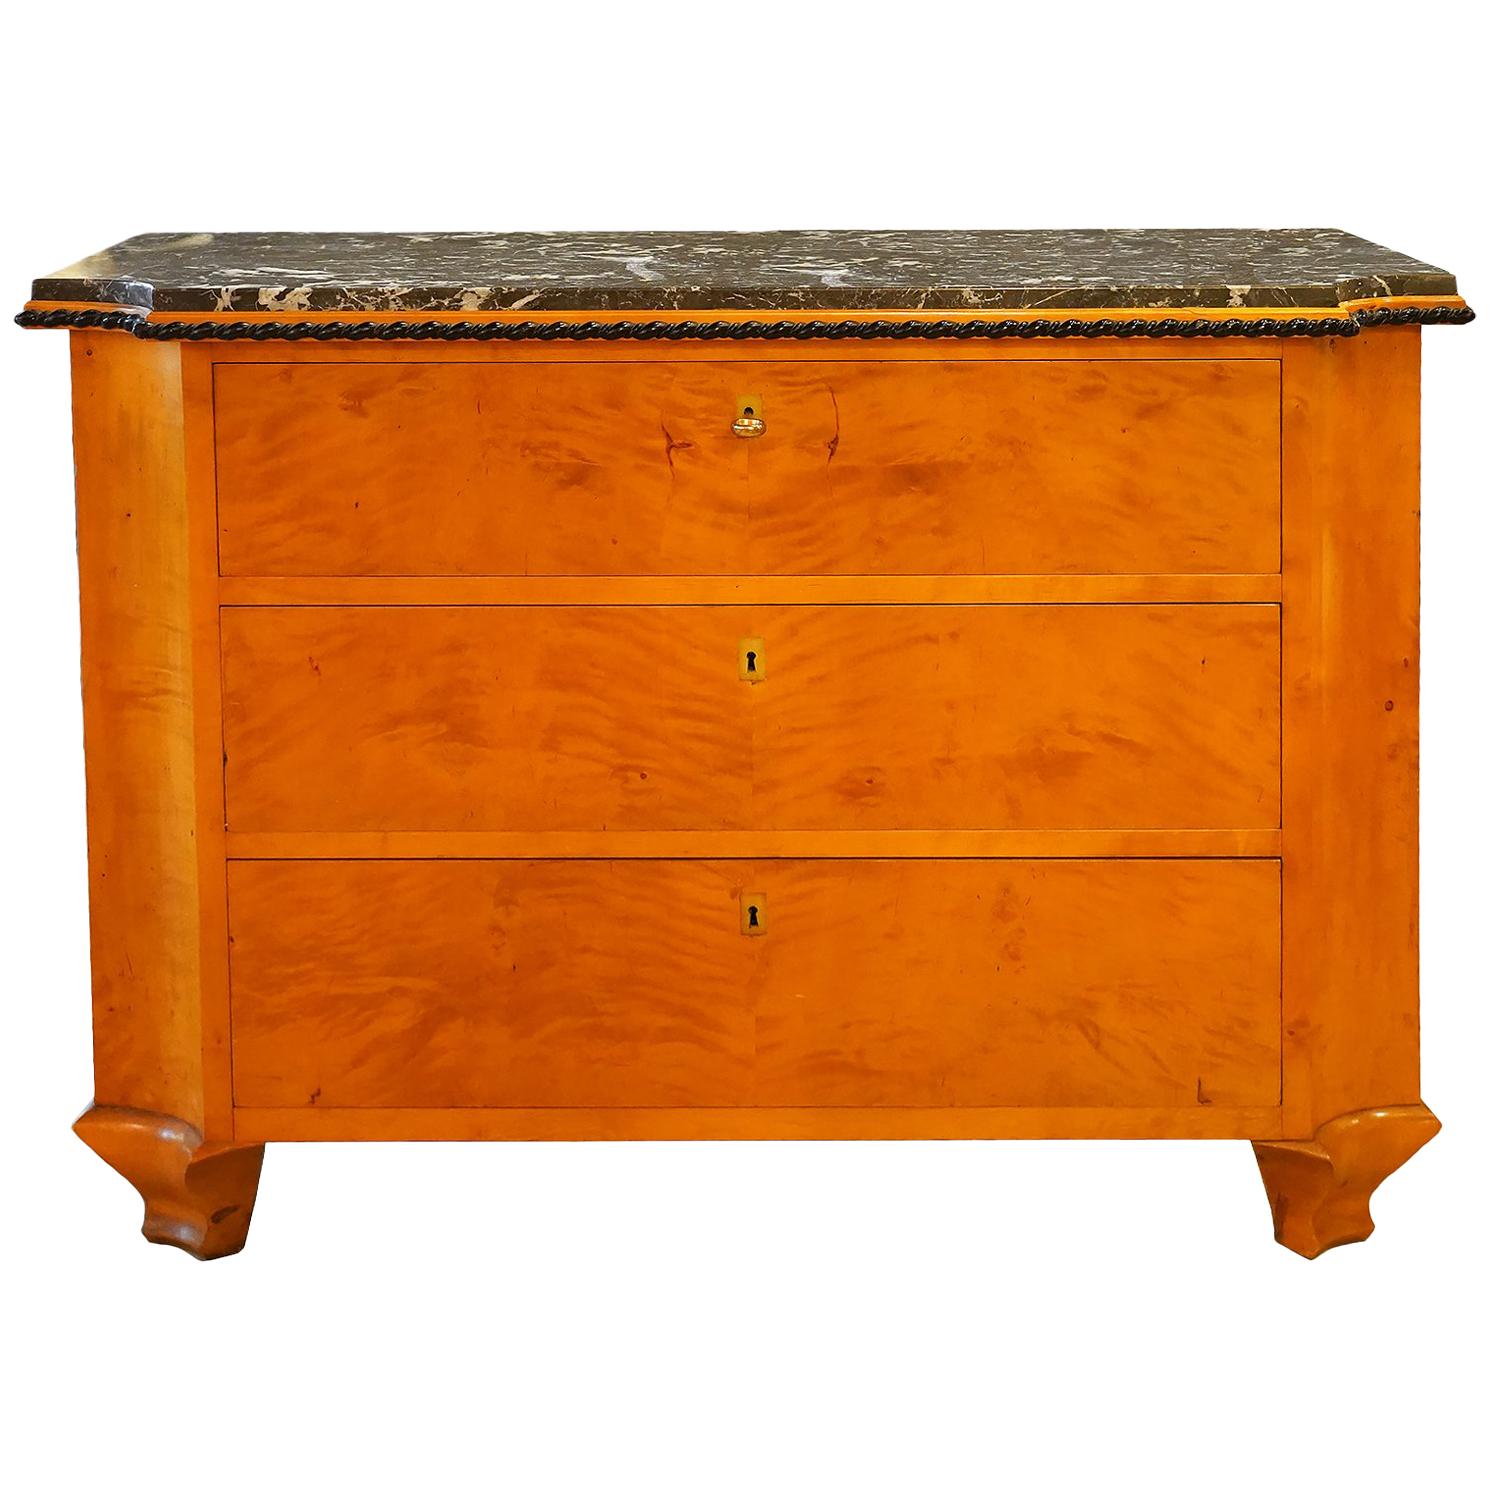 Late 19th Century Austrian Biedermeier Style Marble-Top Chest of Drawers